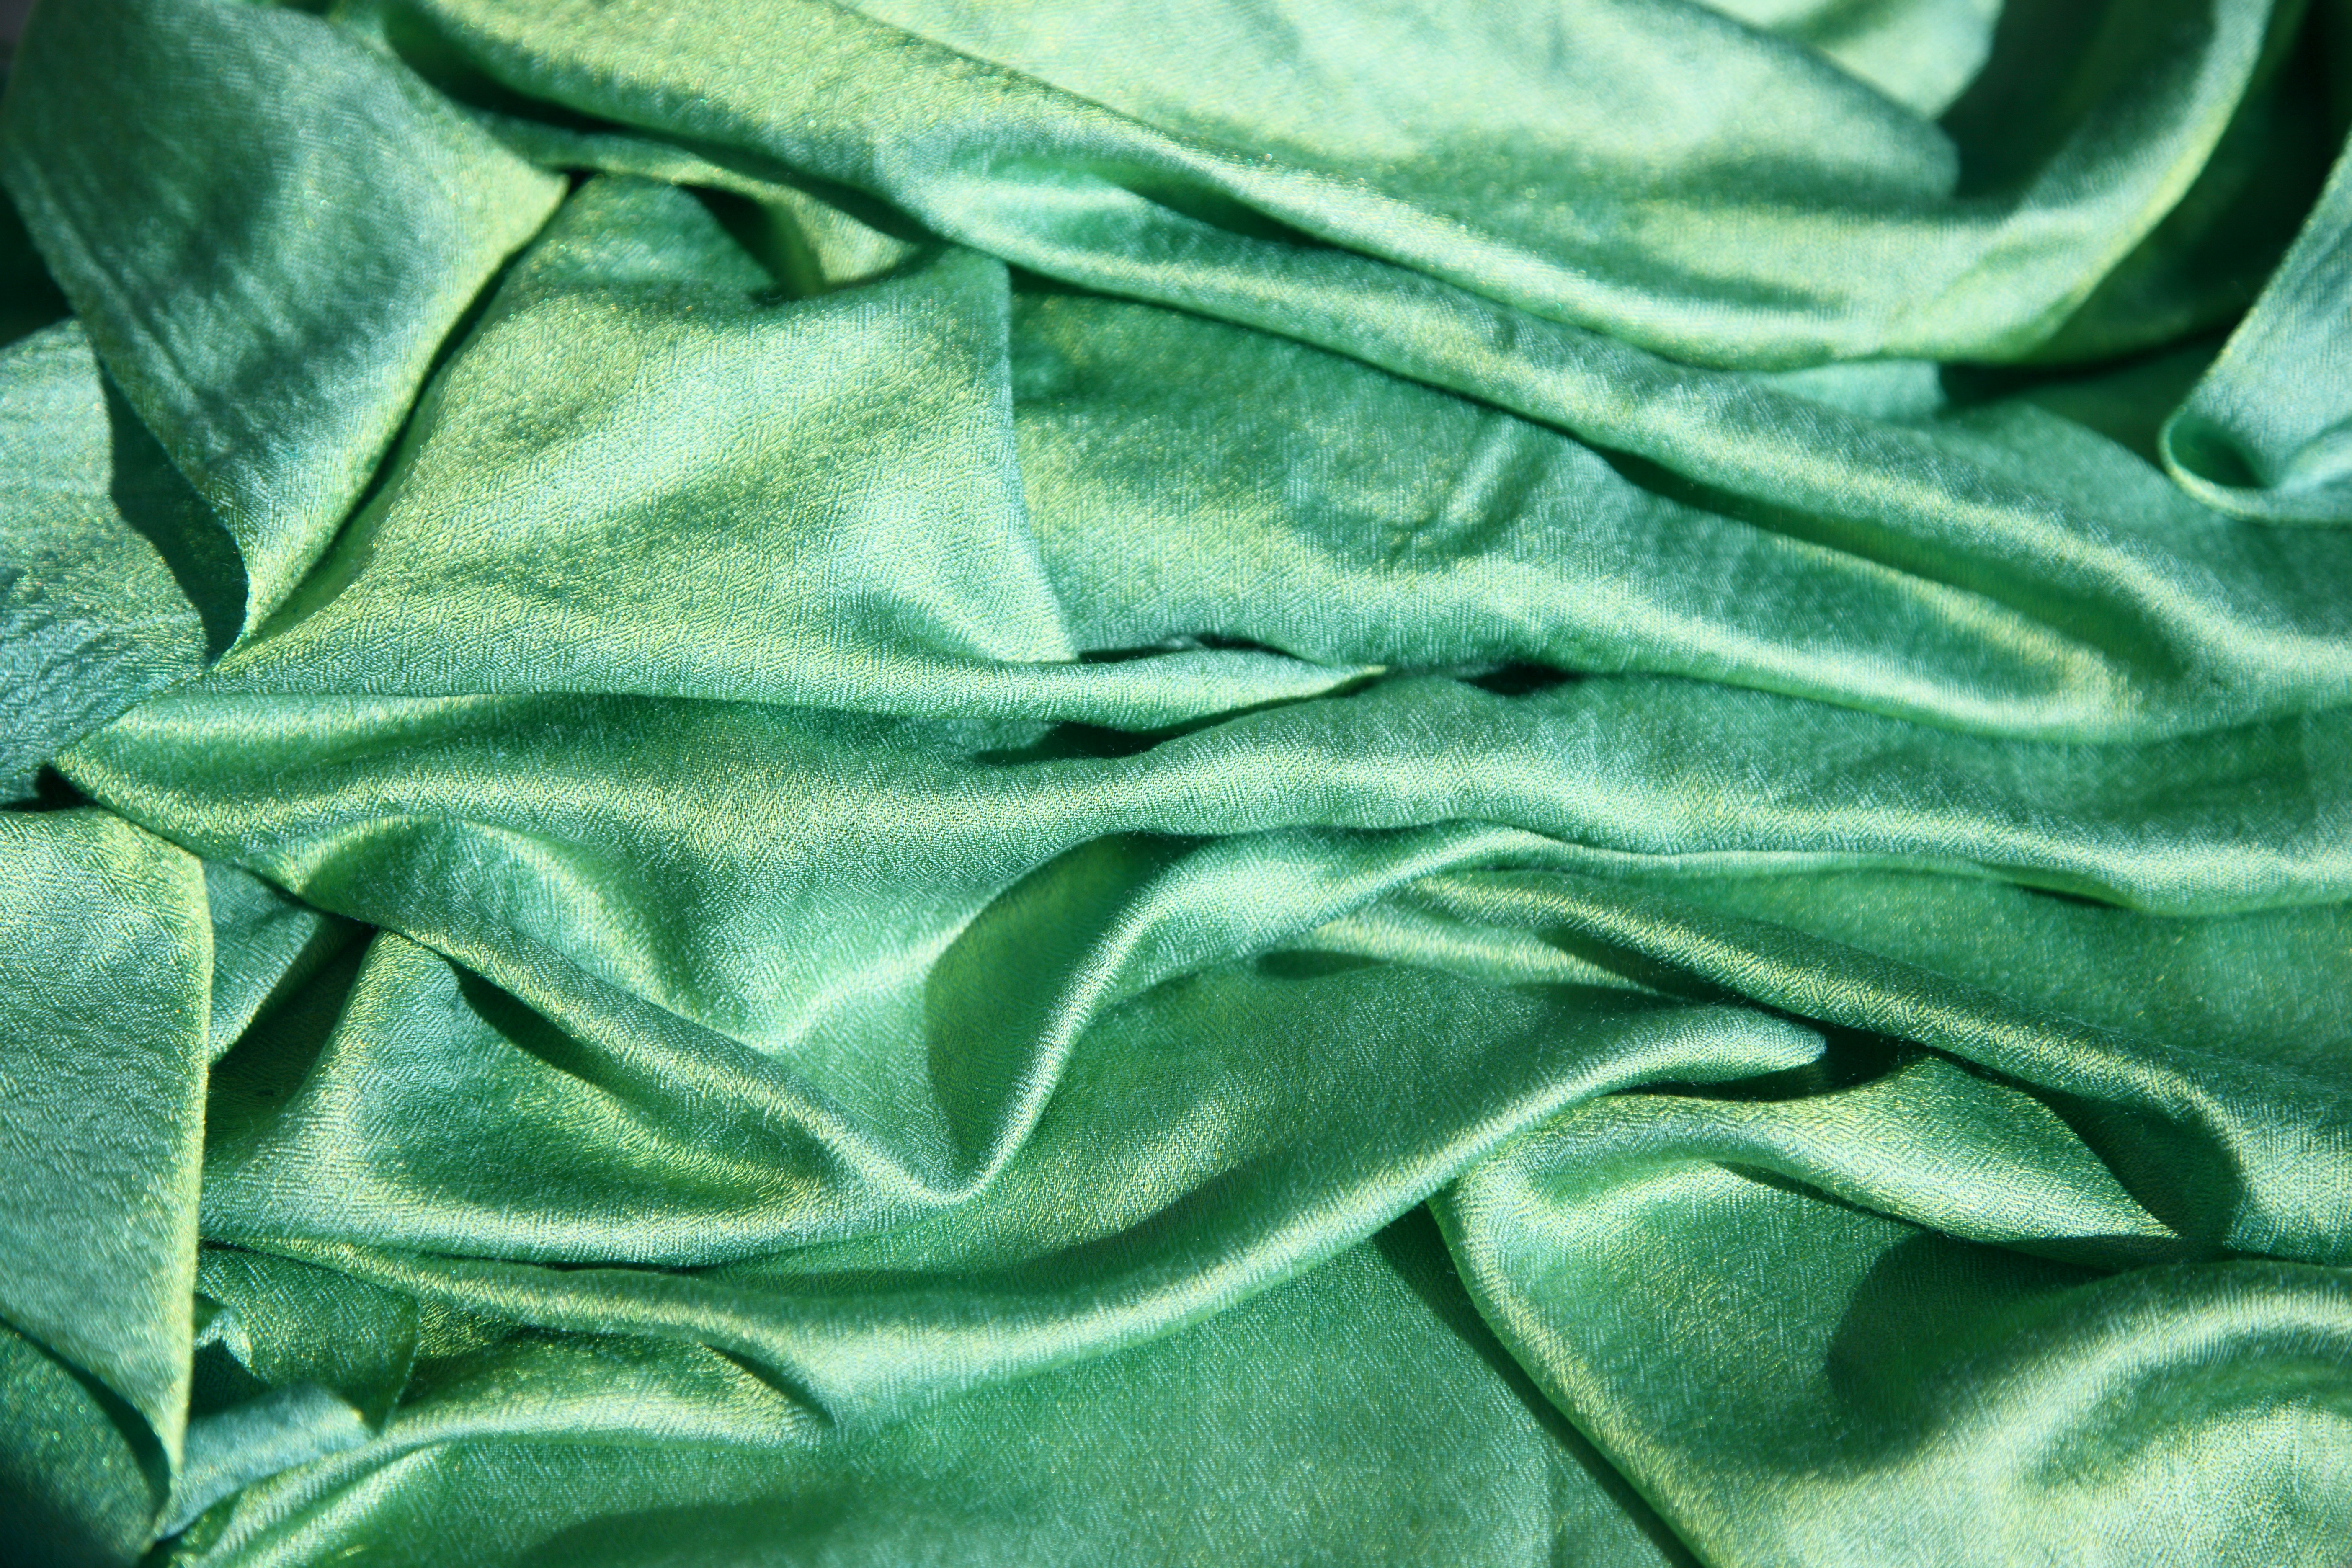 An image showing a close-up view of a fabric treated with stain protection